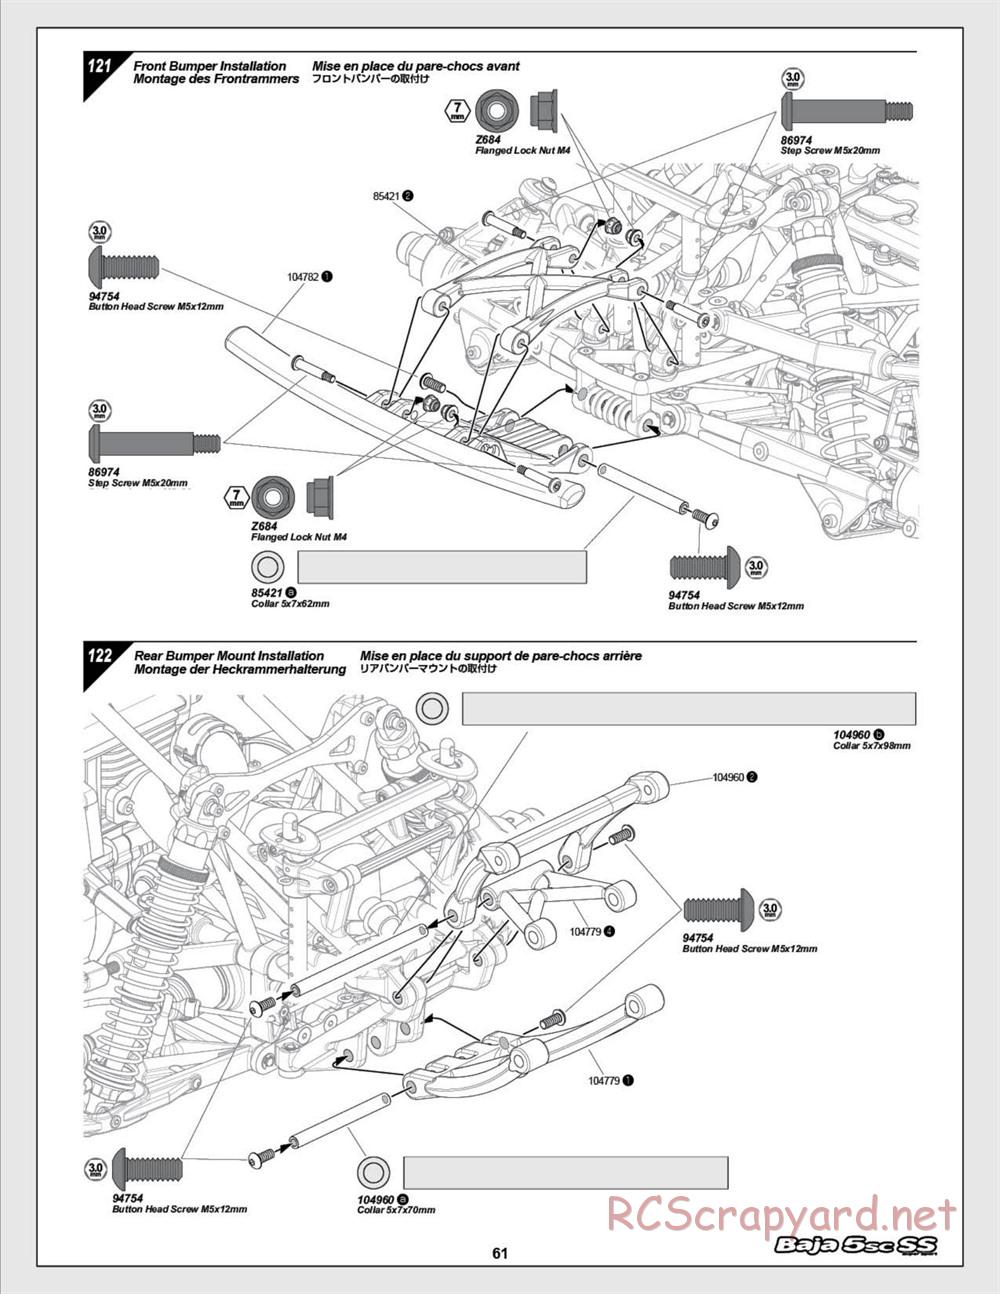 HPI - Baja 5SC SS - Exploded View - Page 61